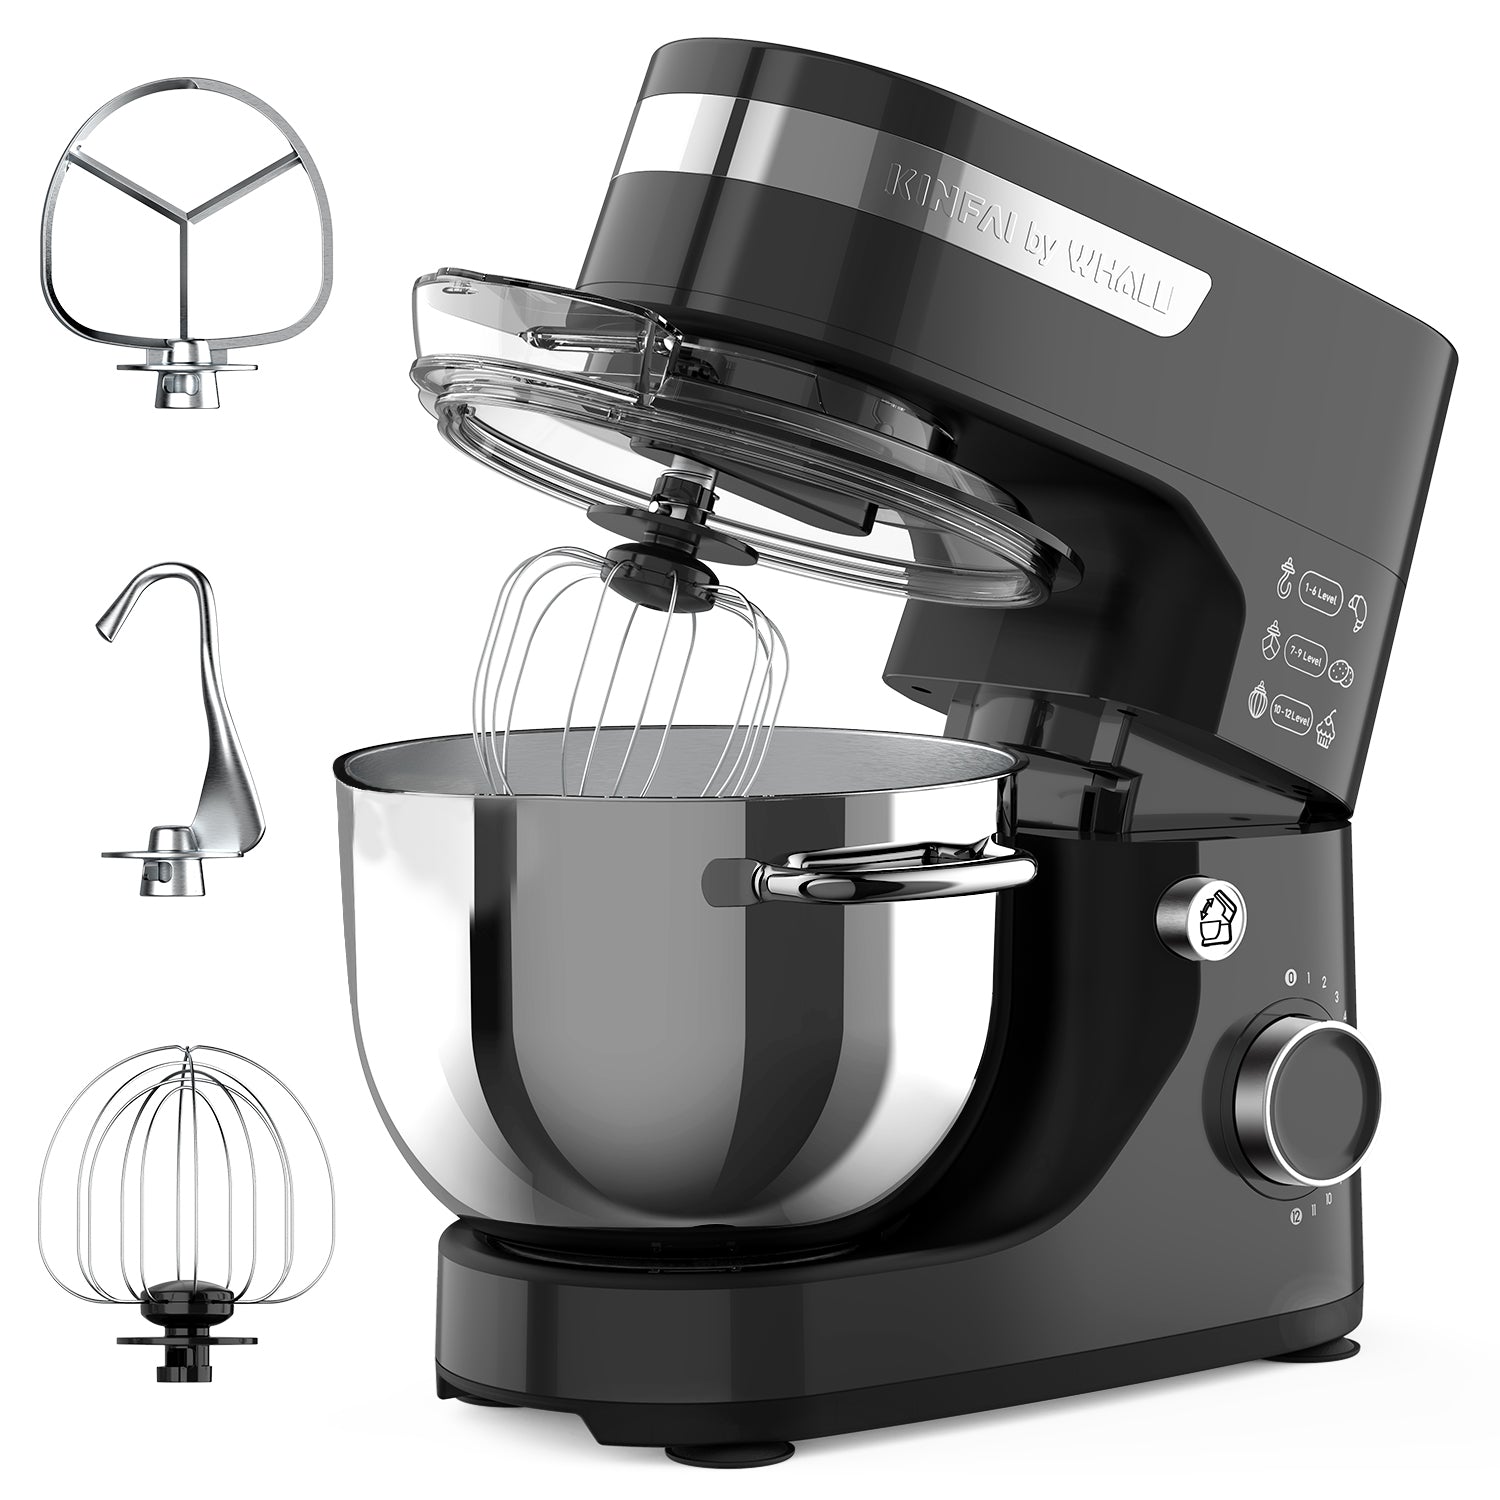 Kinfai Electric Kitchen Stand Mixer Machine with 5.5 Quart Bowl for Cake and Bread Making, Egg Beating, Baking, Dough,Cooking